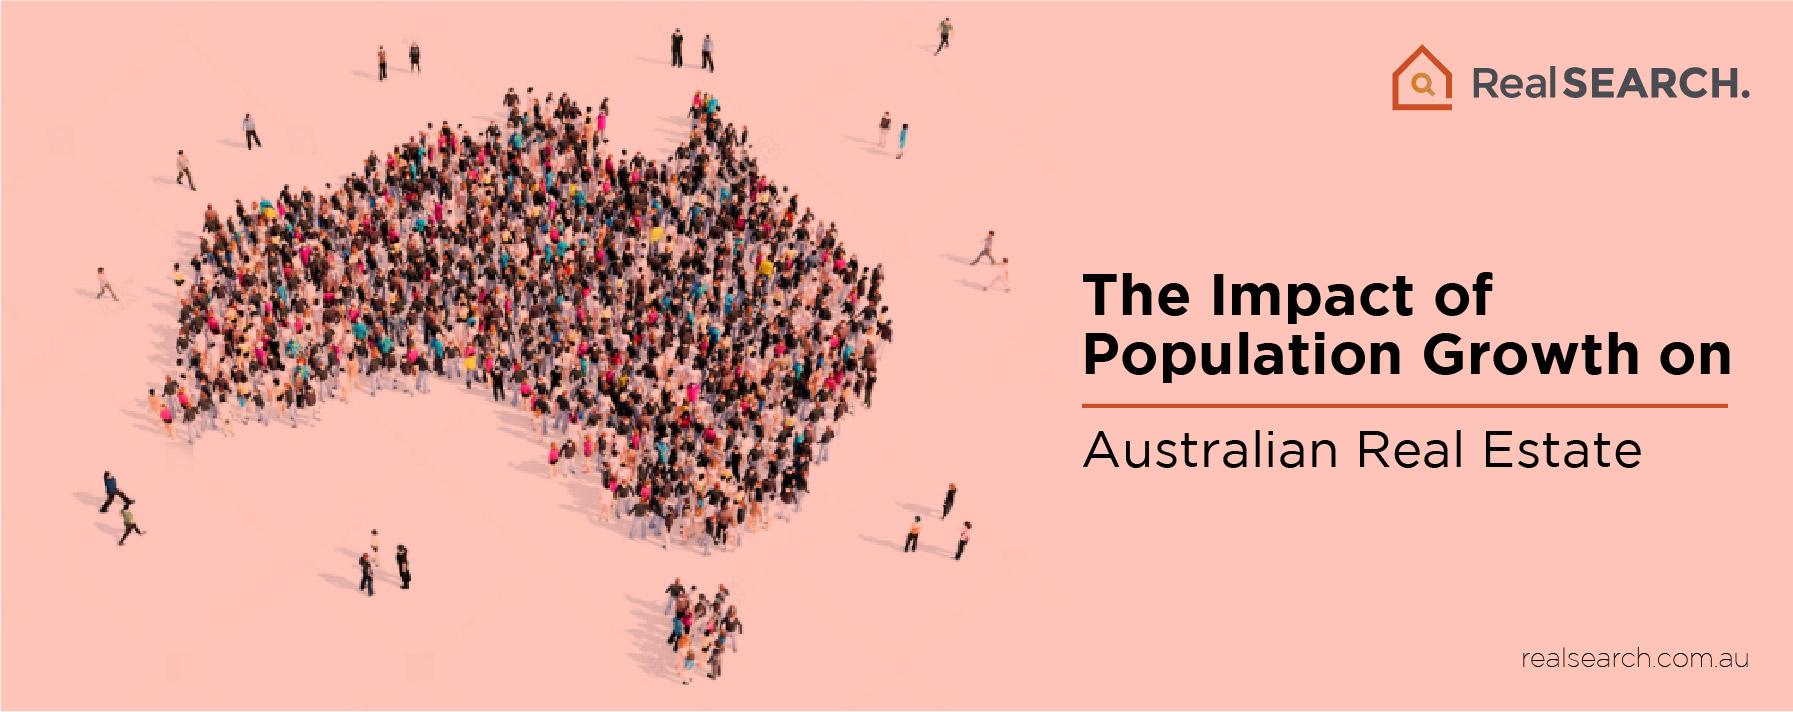 The Impact of Population Growth on Australian Real Estate